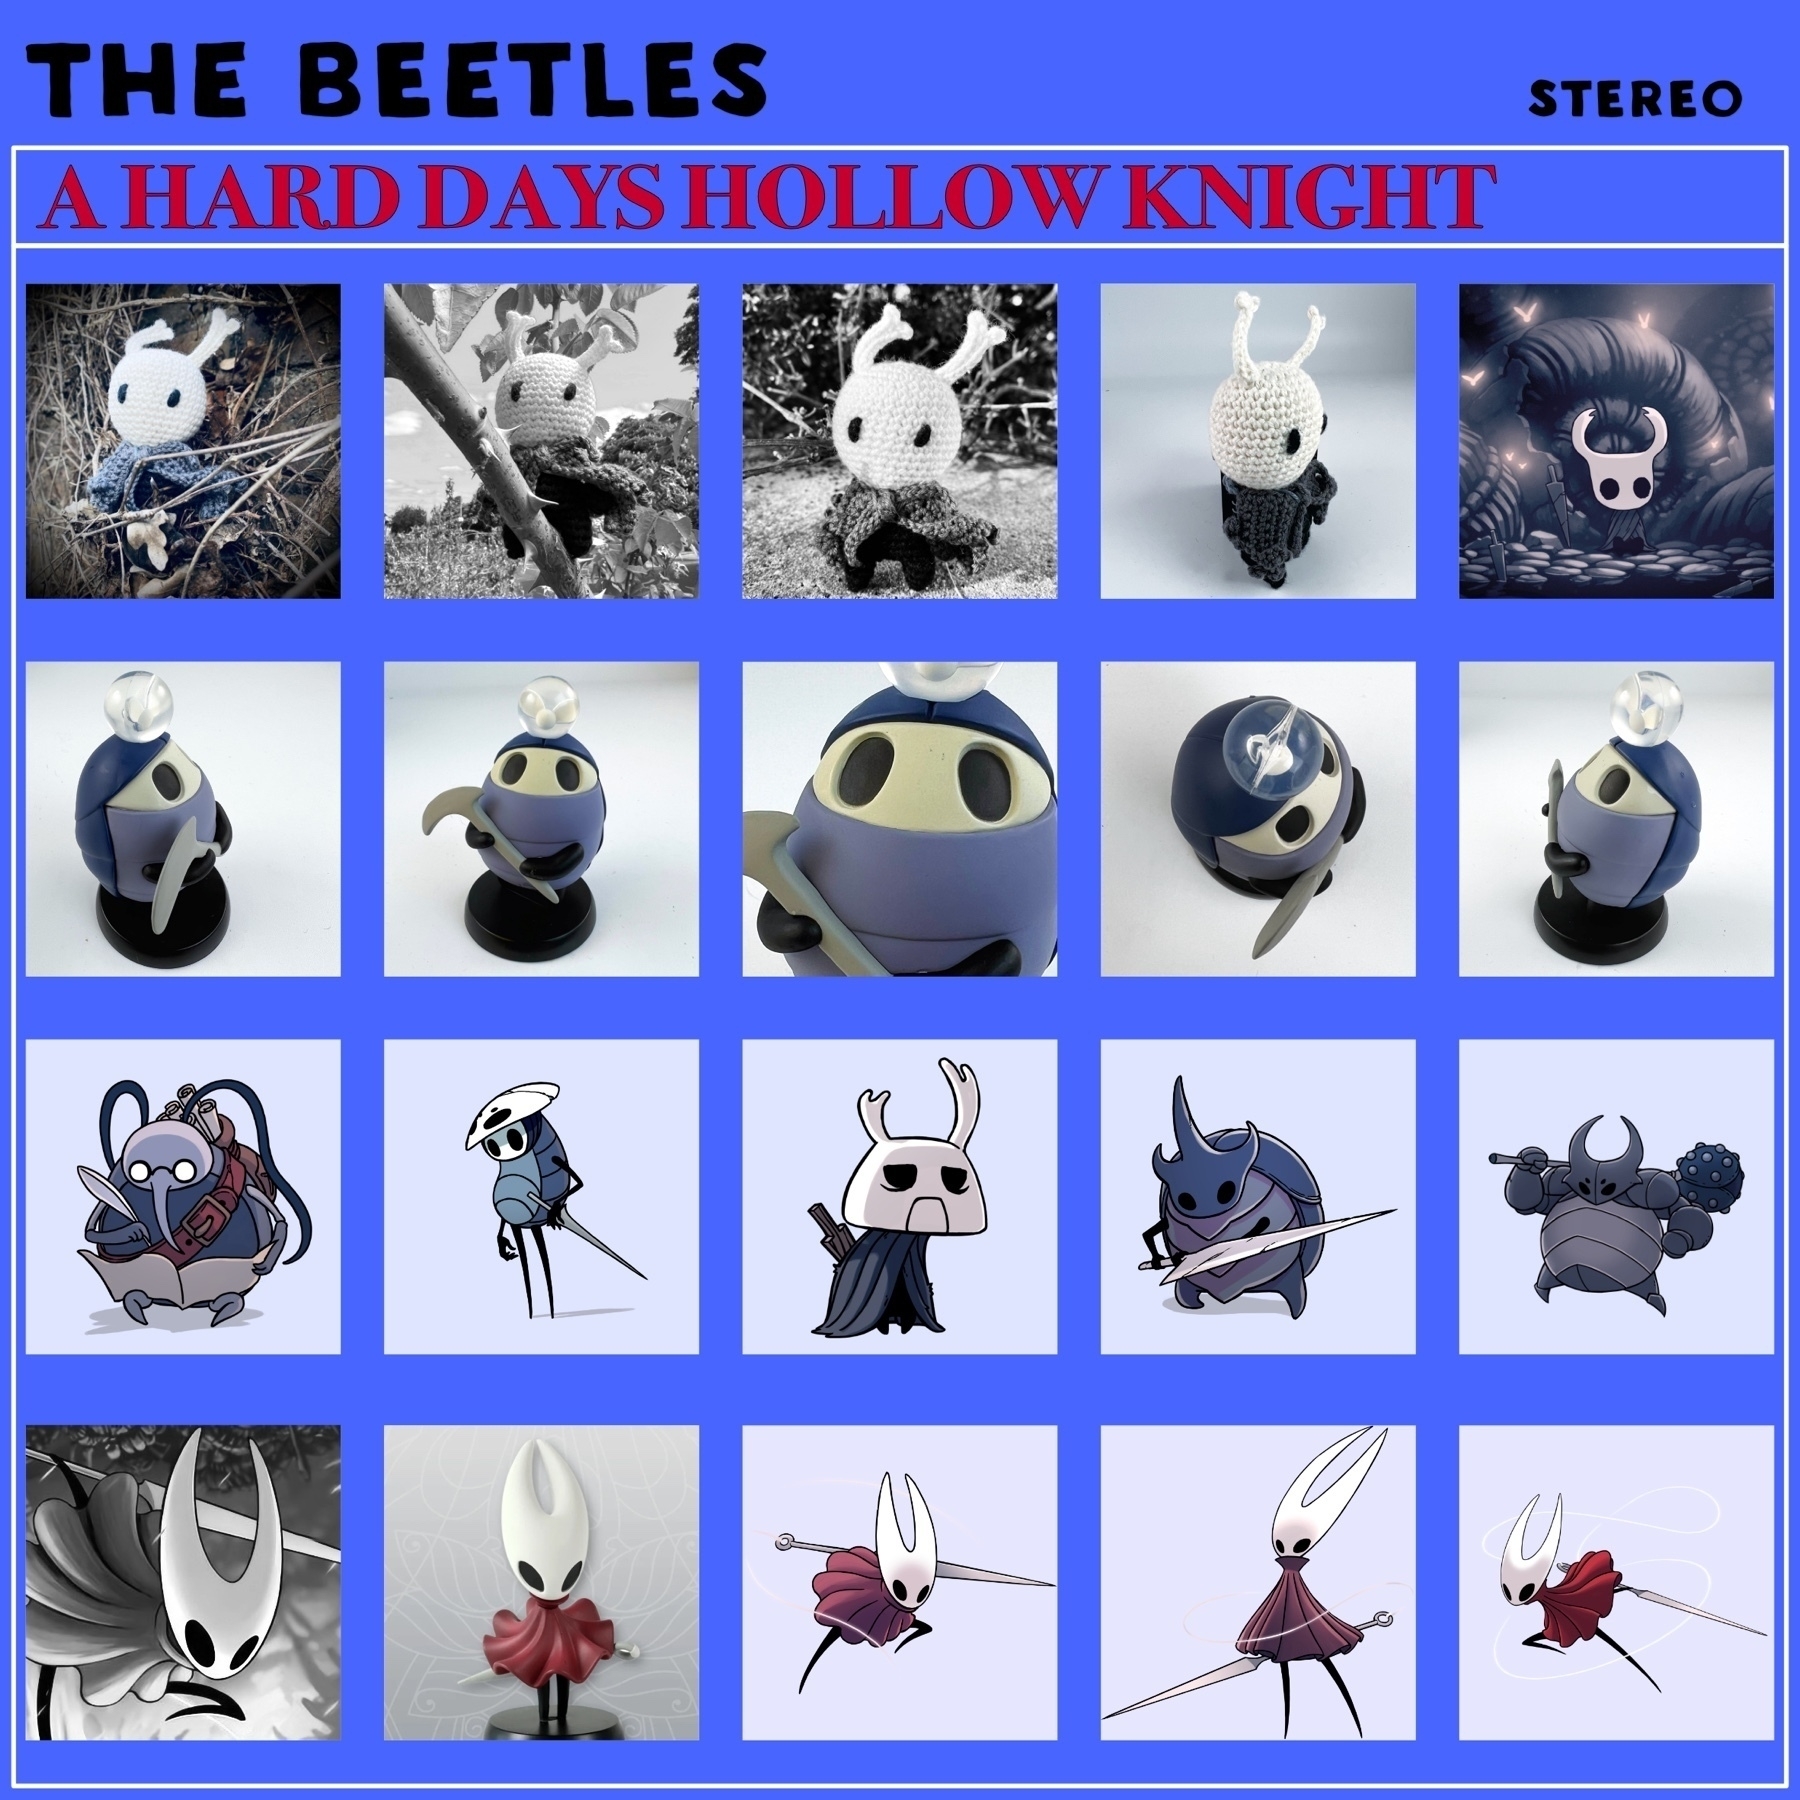 Fake Album Cover for A Hard Days Hollow Knight